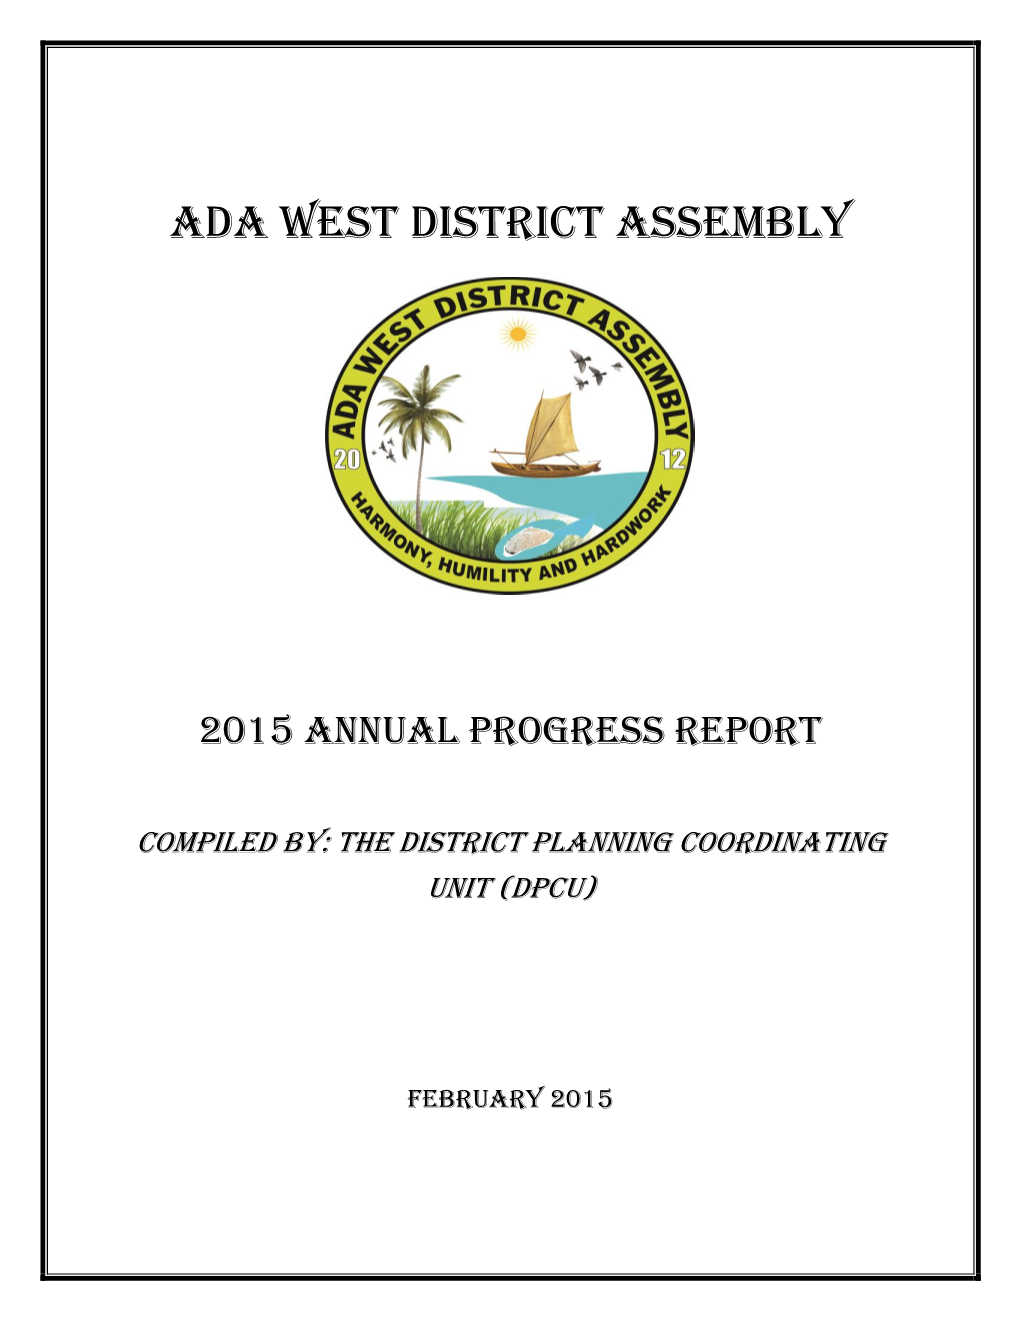 ADA West District Assembly